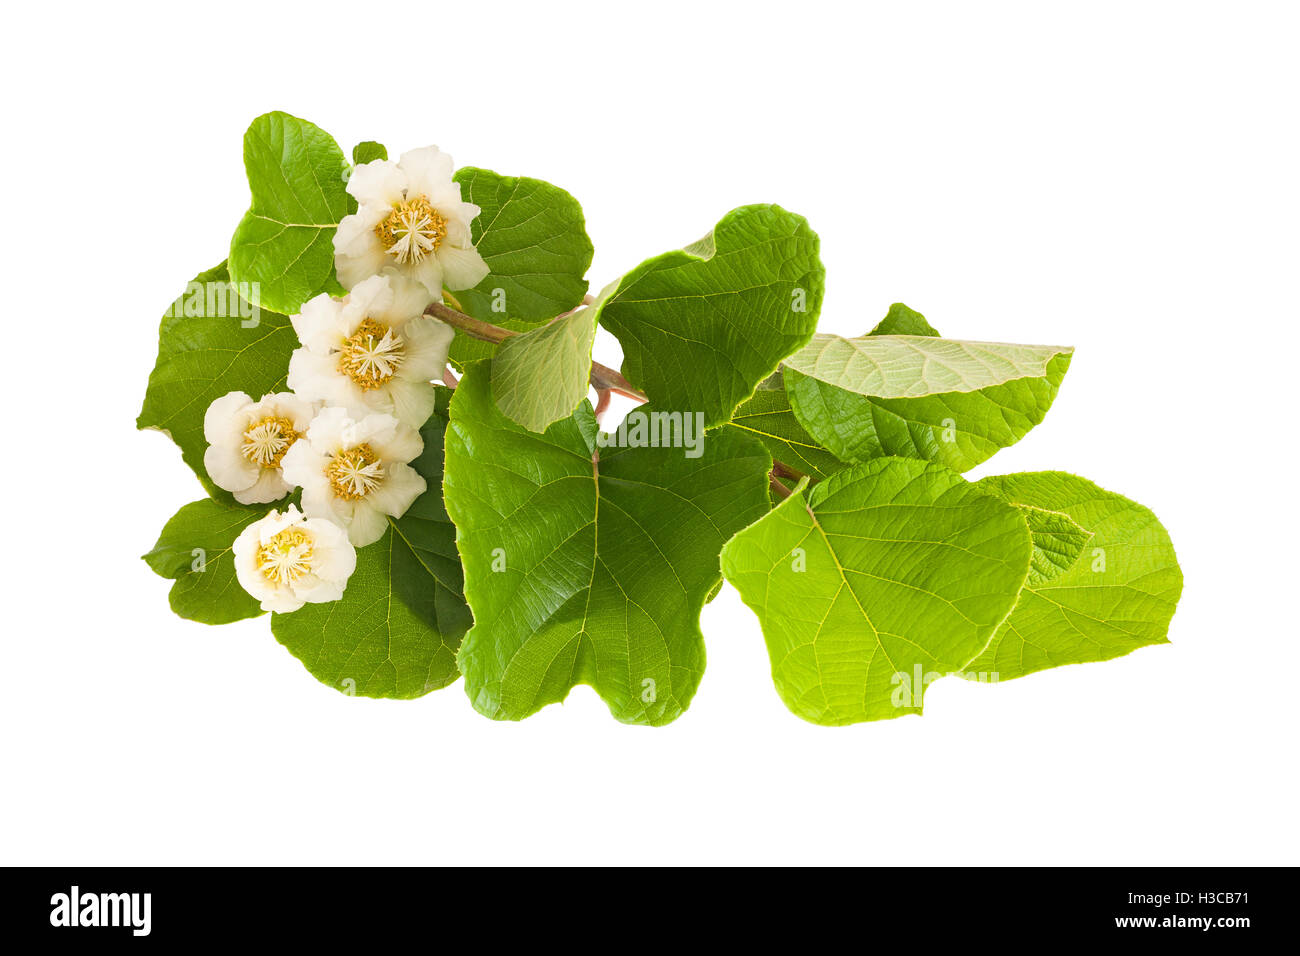 Kiwifruit branch with leaves and flowers isolated on white Stock Photo